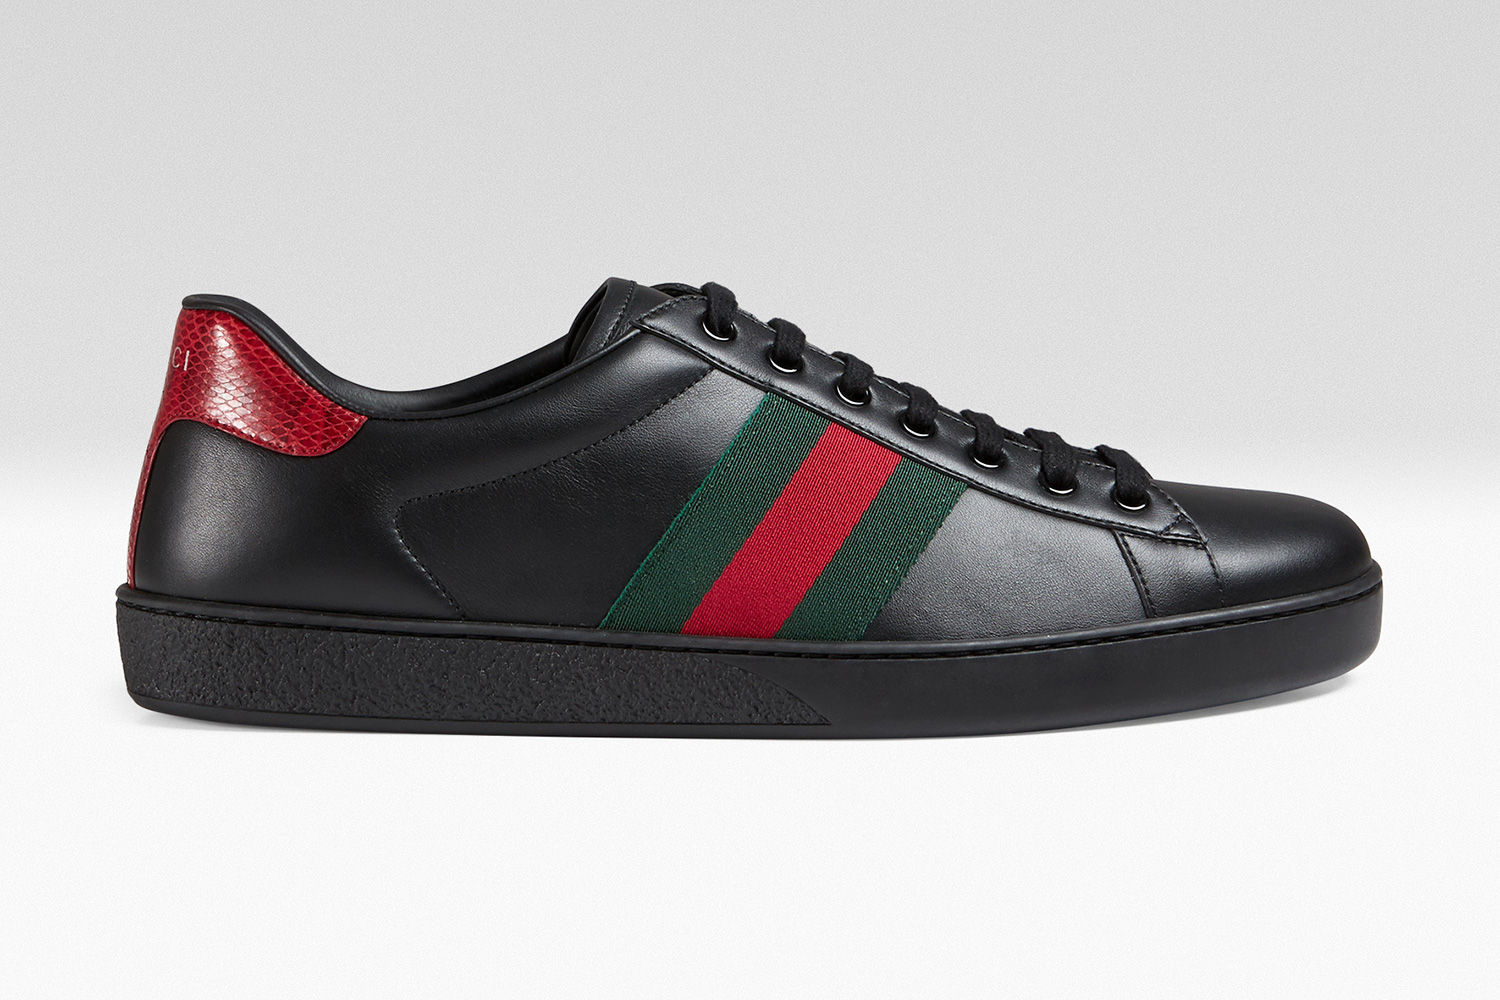 Gucci adds additional Ace Sneaker Colourways for Pre-Fall